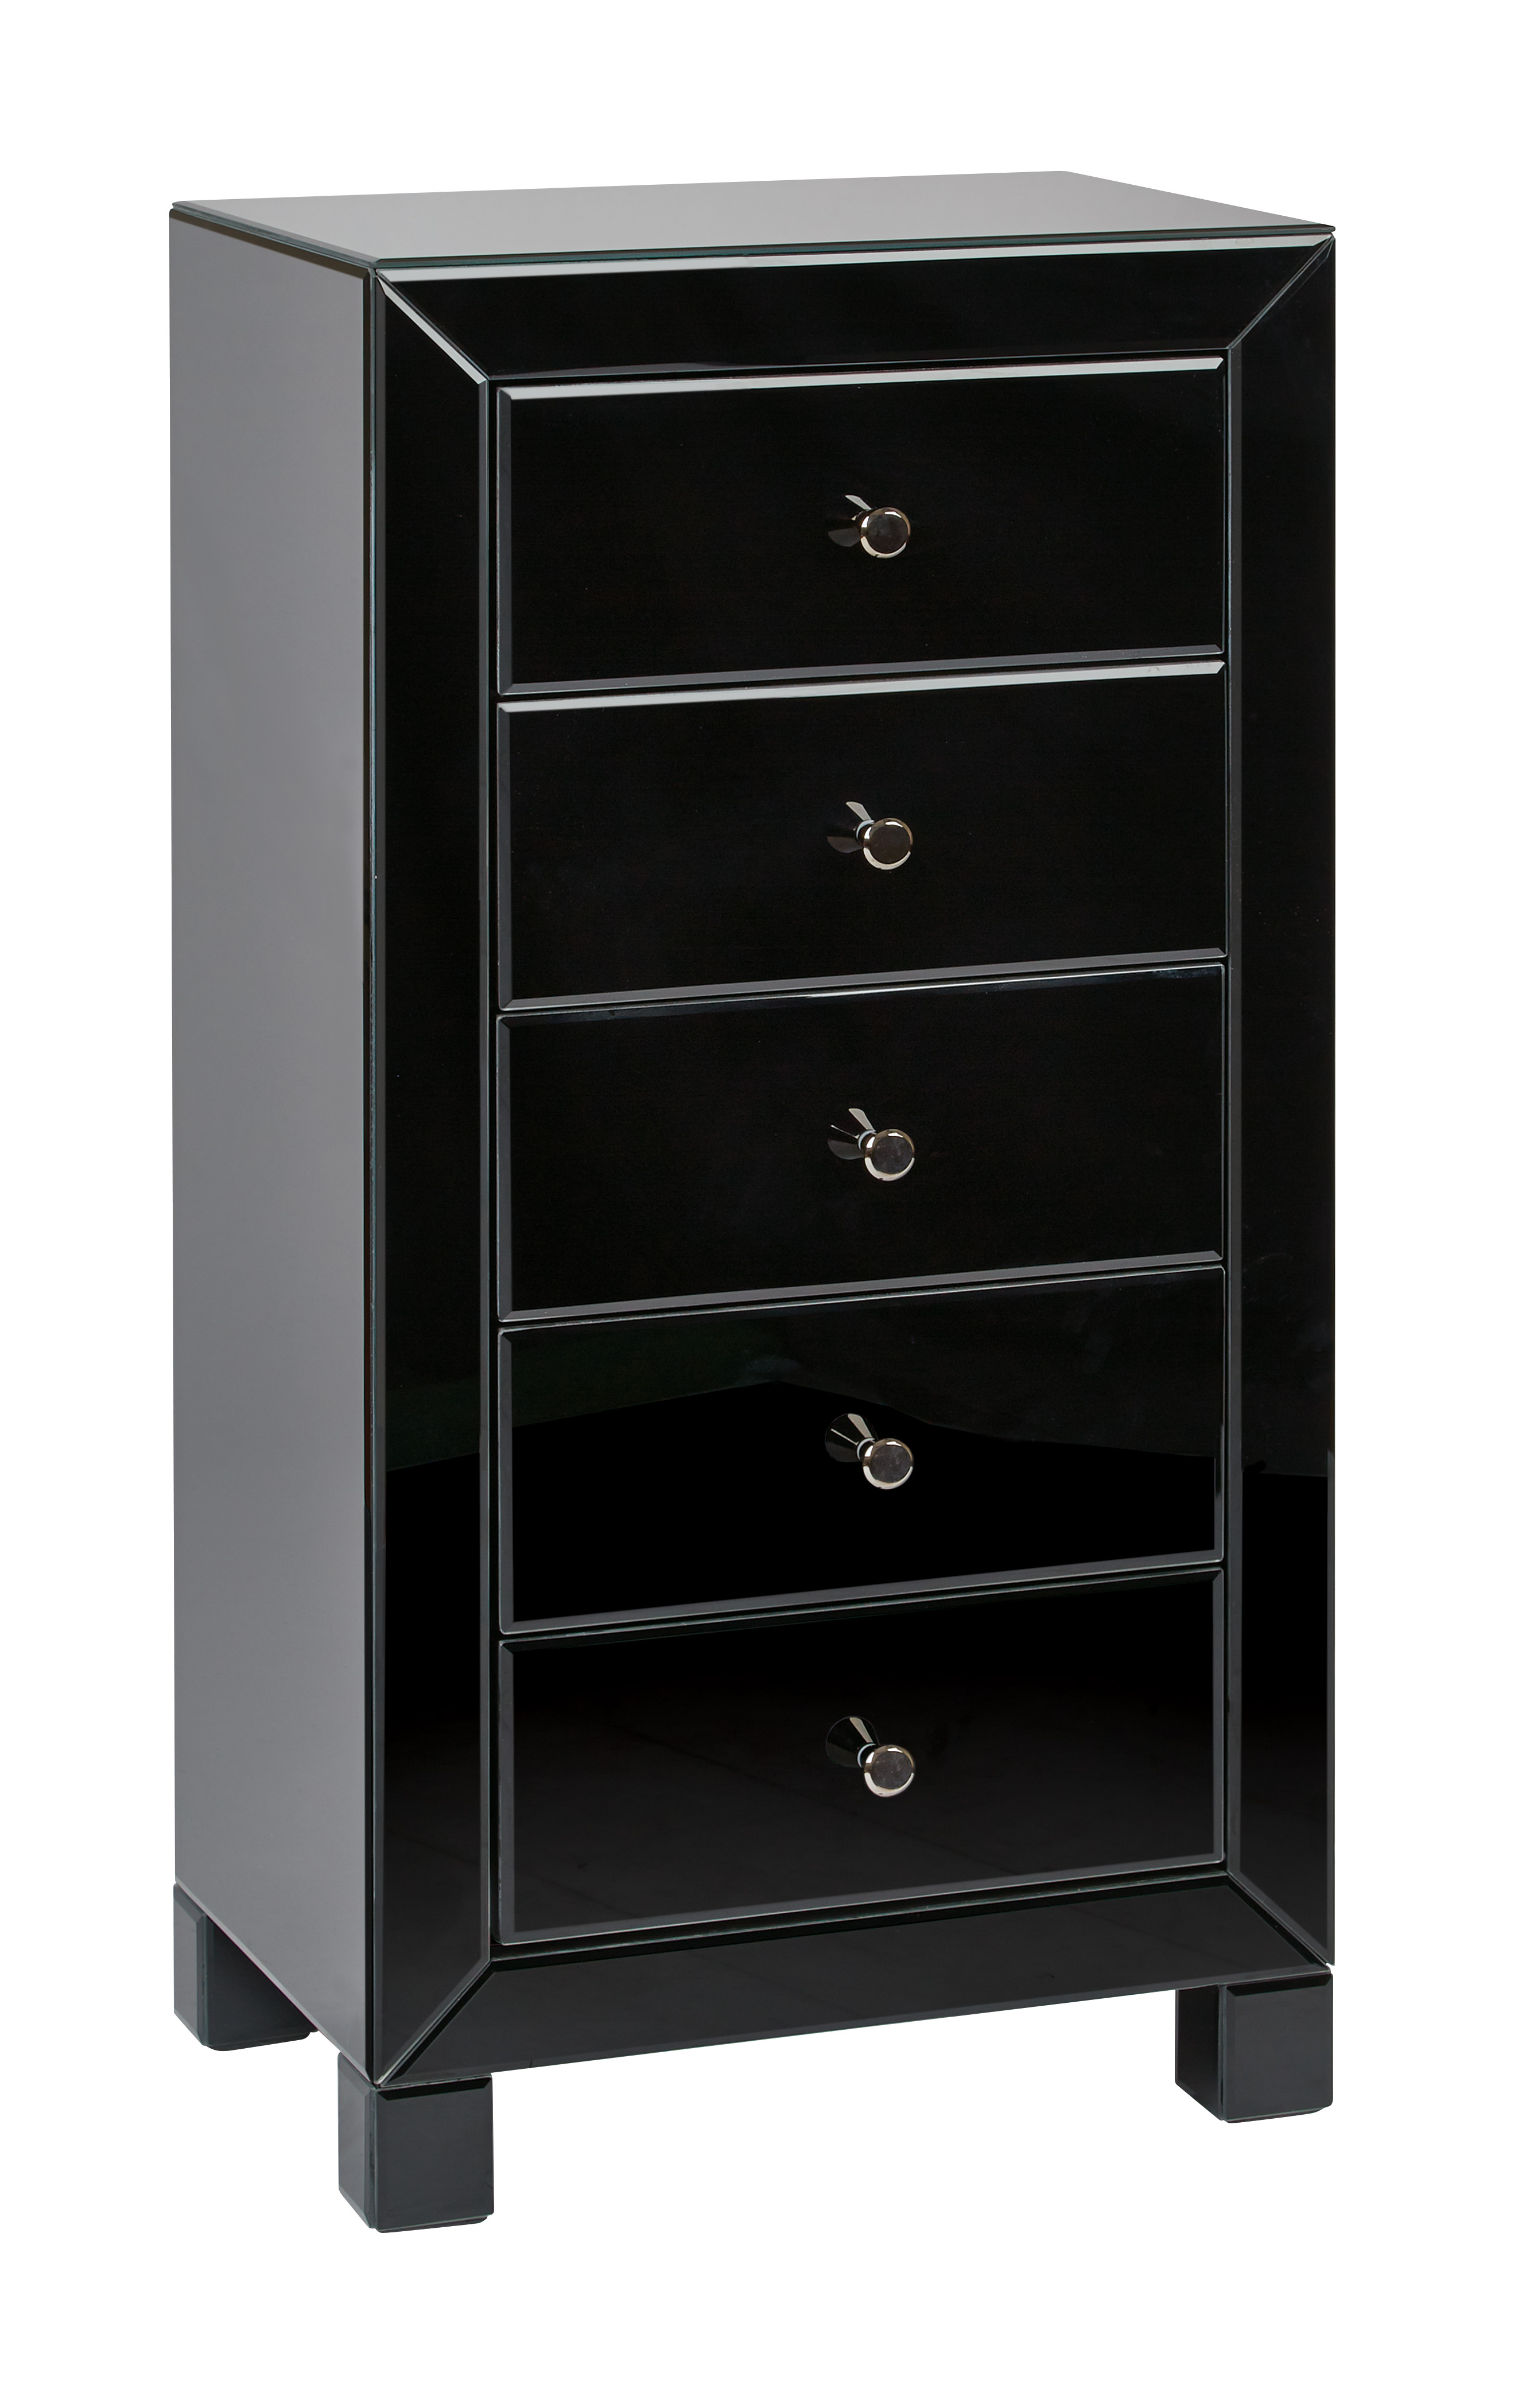 Avenue Six Reflections 5 Drawer Accent Table with Black or White Glass Finish - Assembled